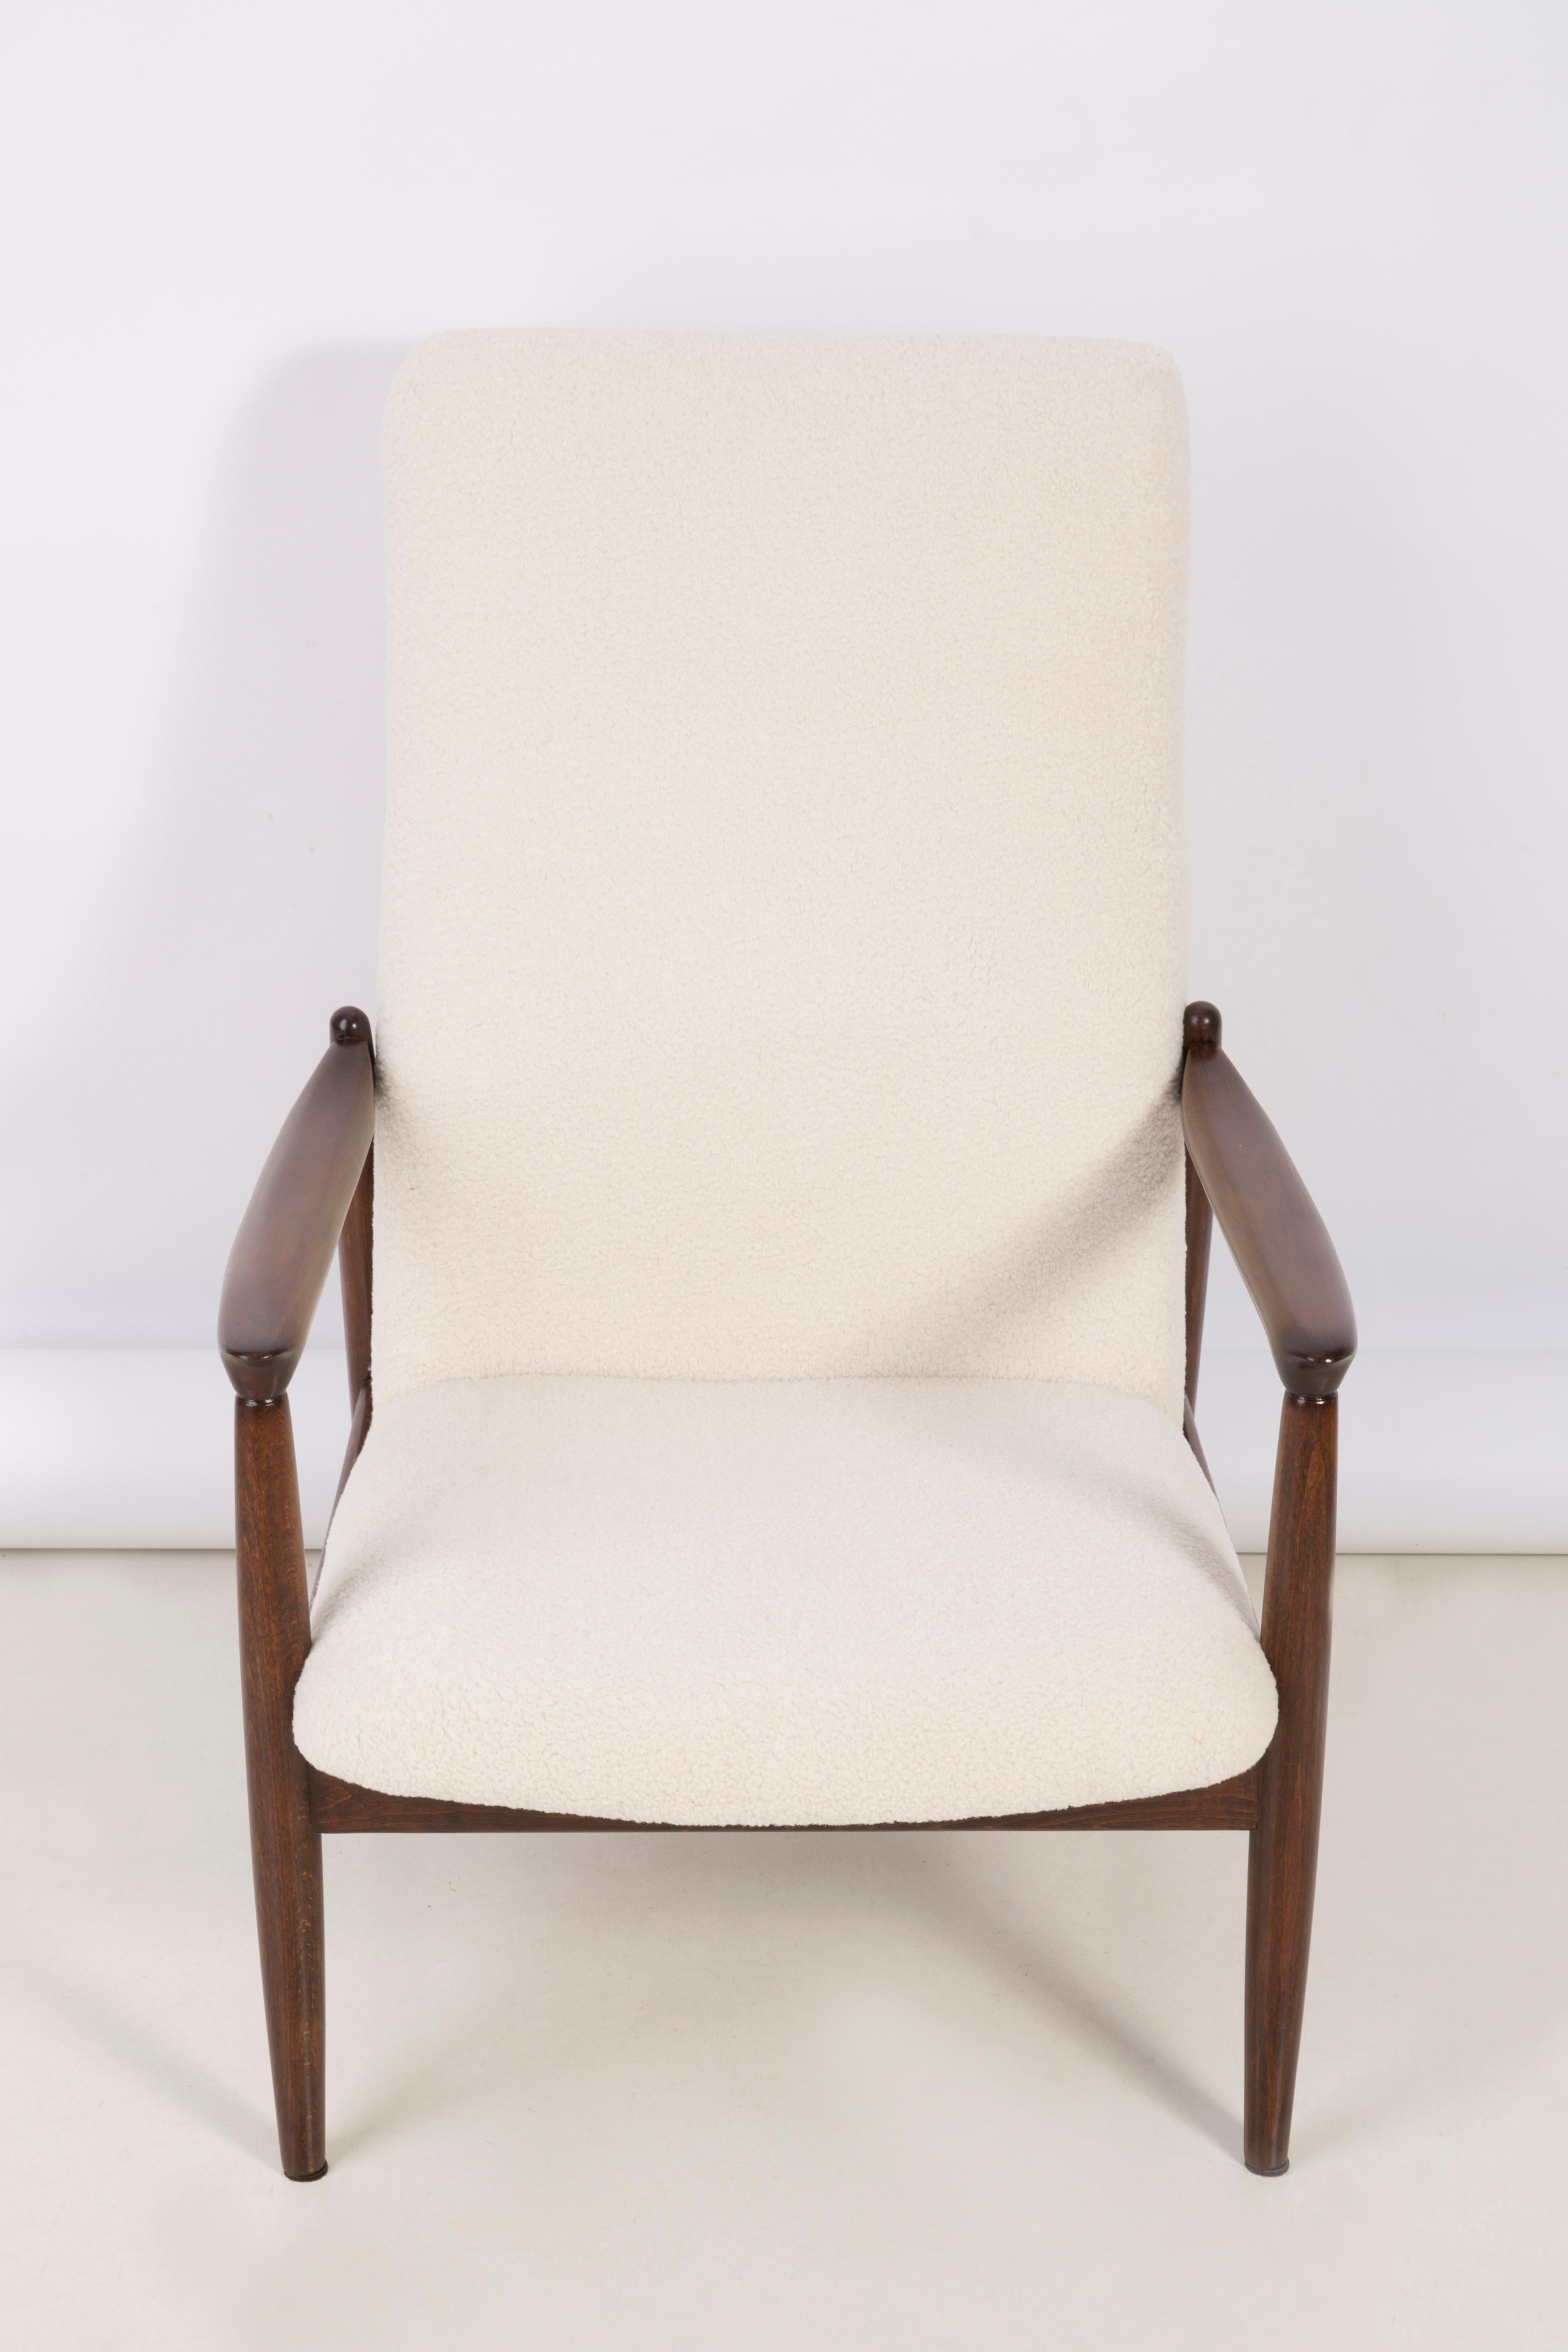 Hand-Crafted 20th Century Crème Boucle Armchair and Stool, Edmund Homa, 1960s For Sale